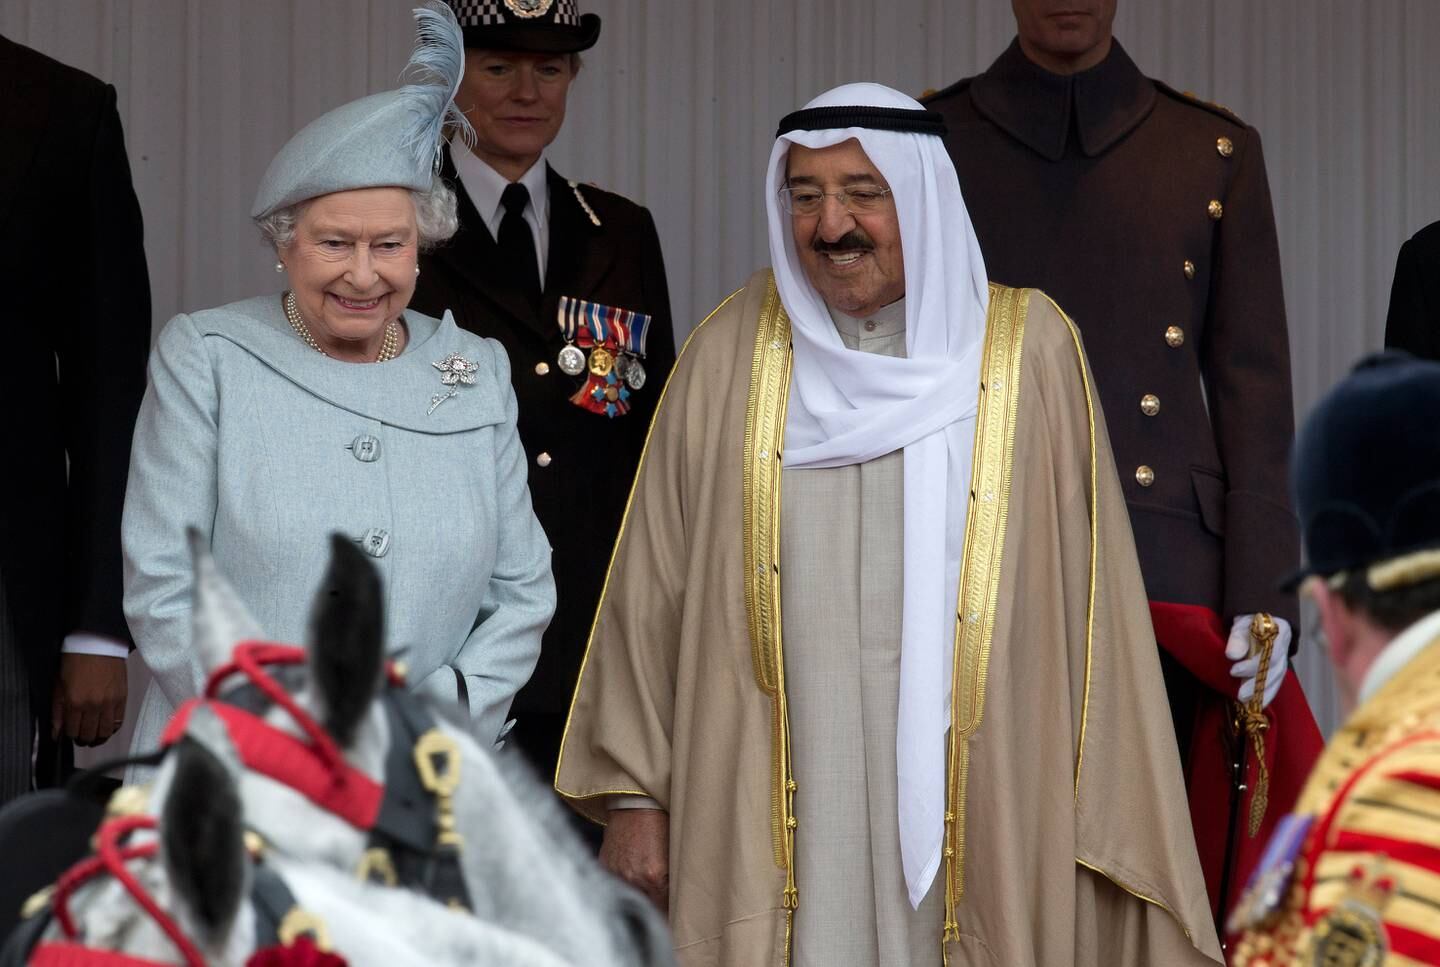 Sheikh Sabah Al Sabah, who was then Emir of Kuwait, and Queen Elizabeth II at Windsor Castle during a three-day state visit in November, 2012. Getty Images